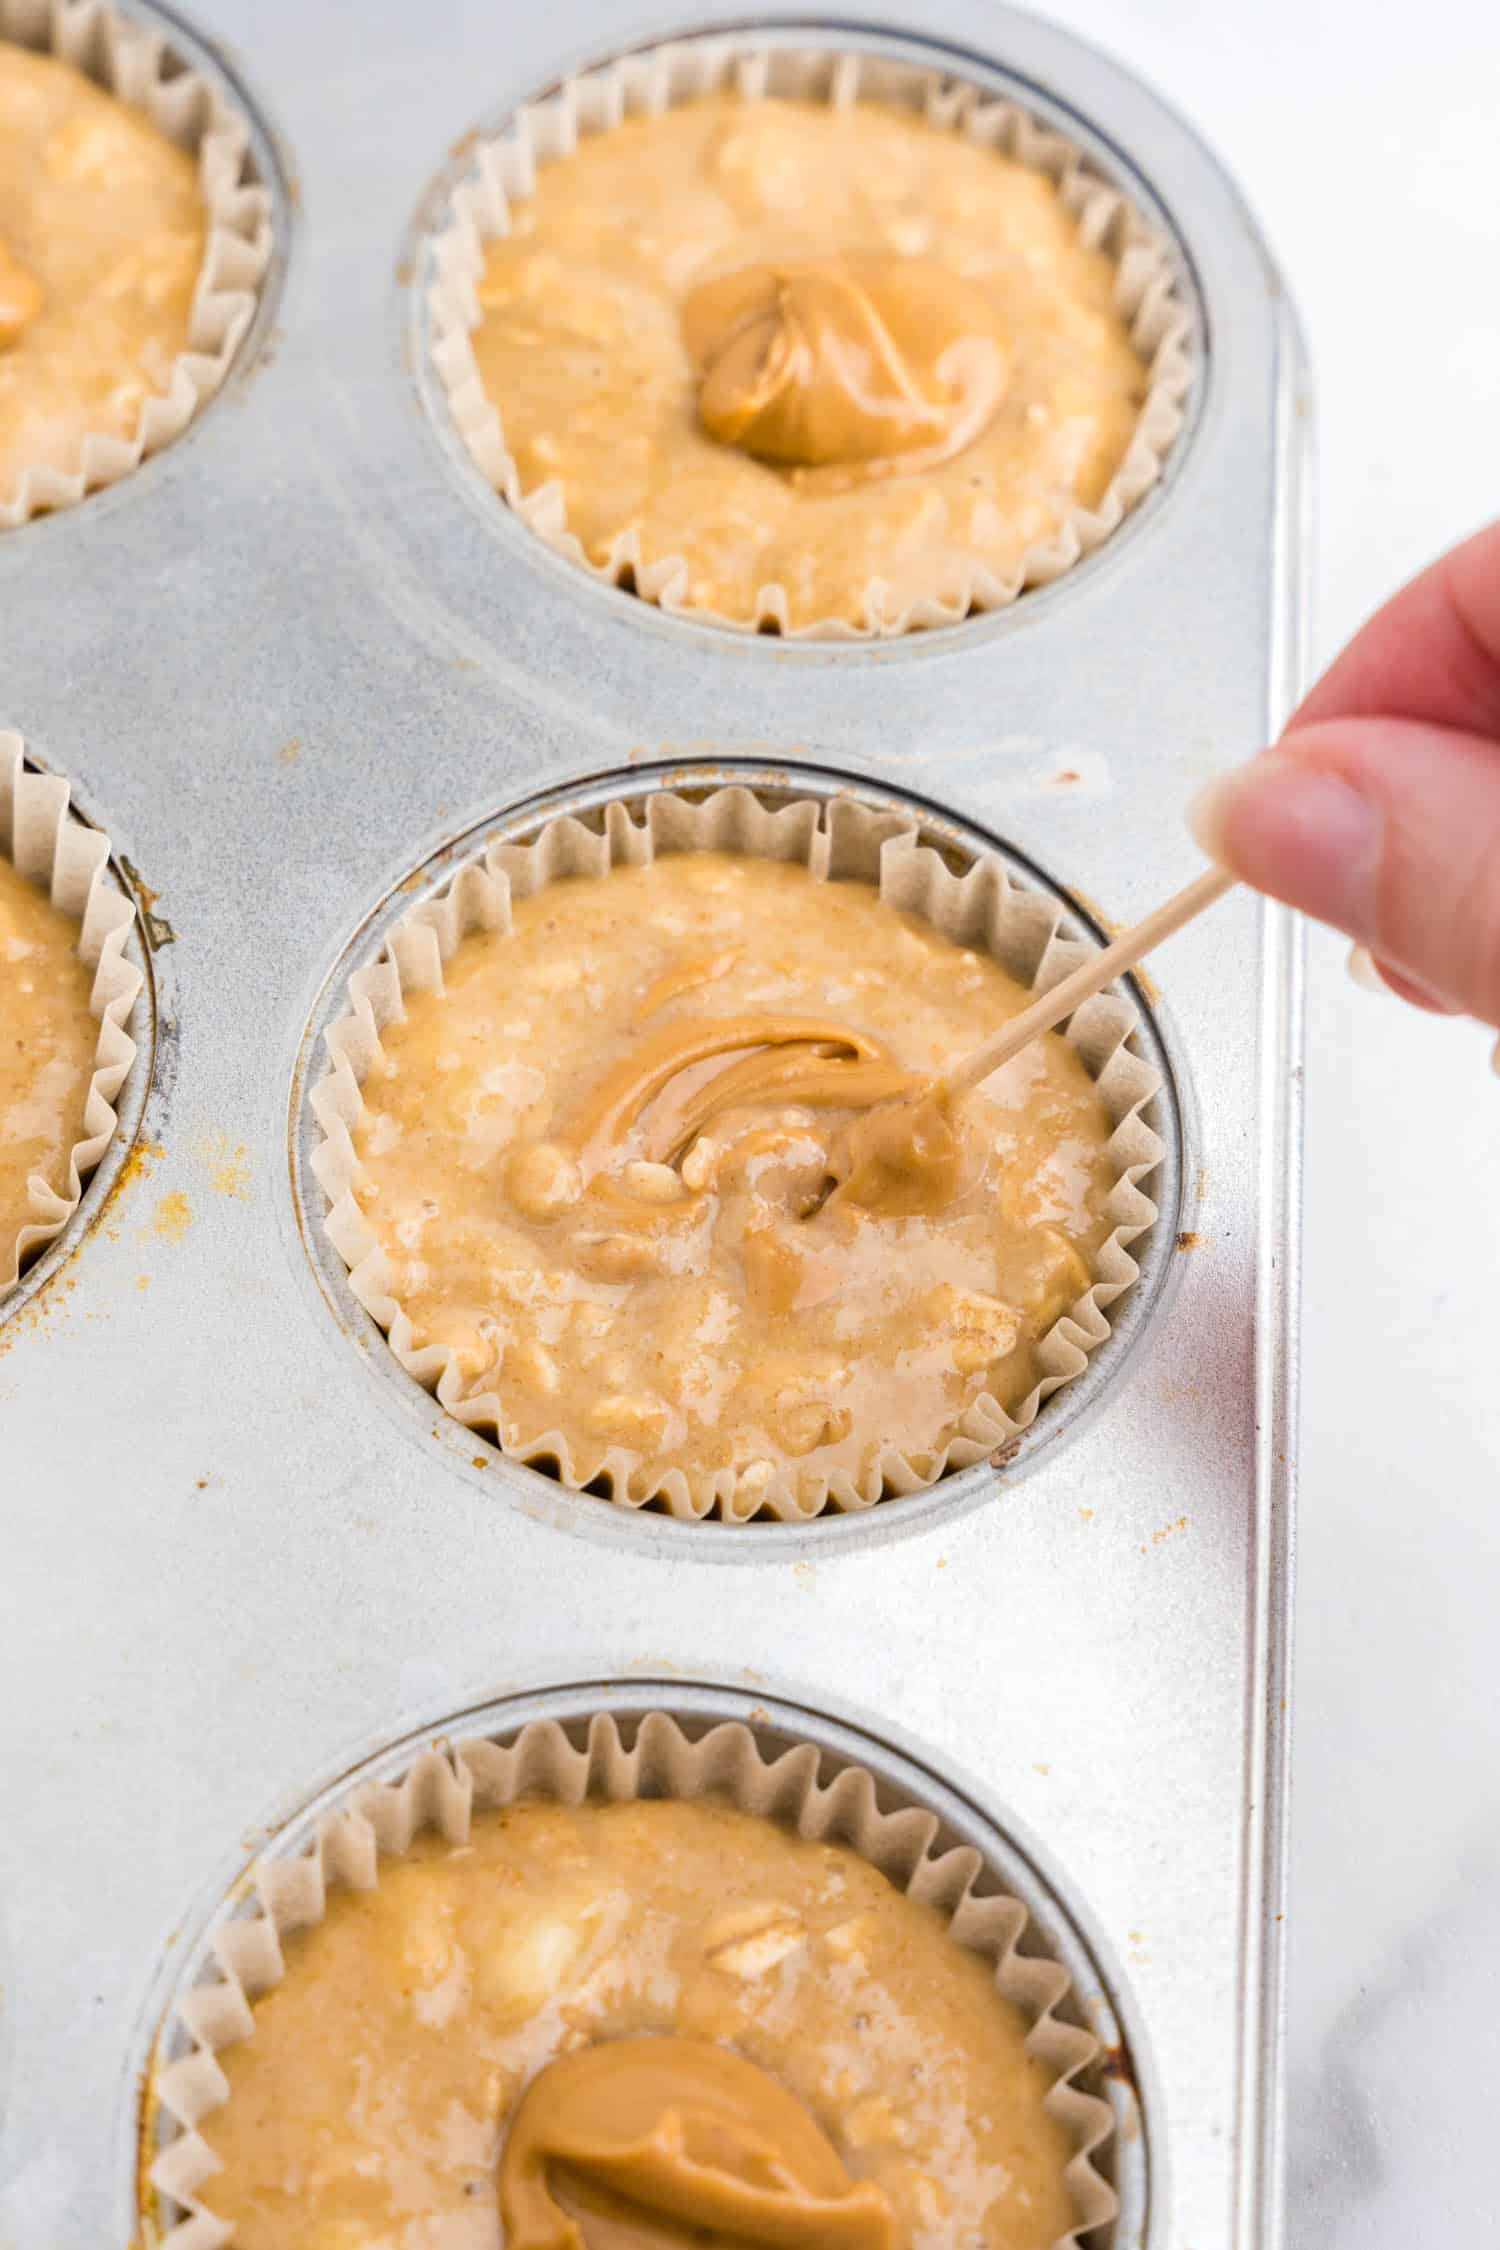 put a teaspoon of peanut butter into each cupcake and mix together with a toothpick.